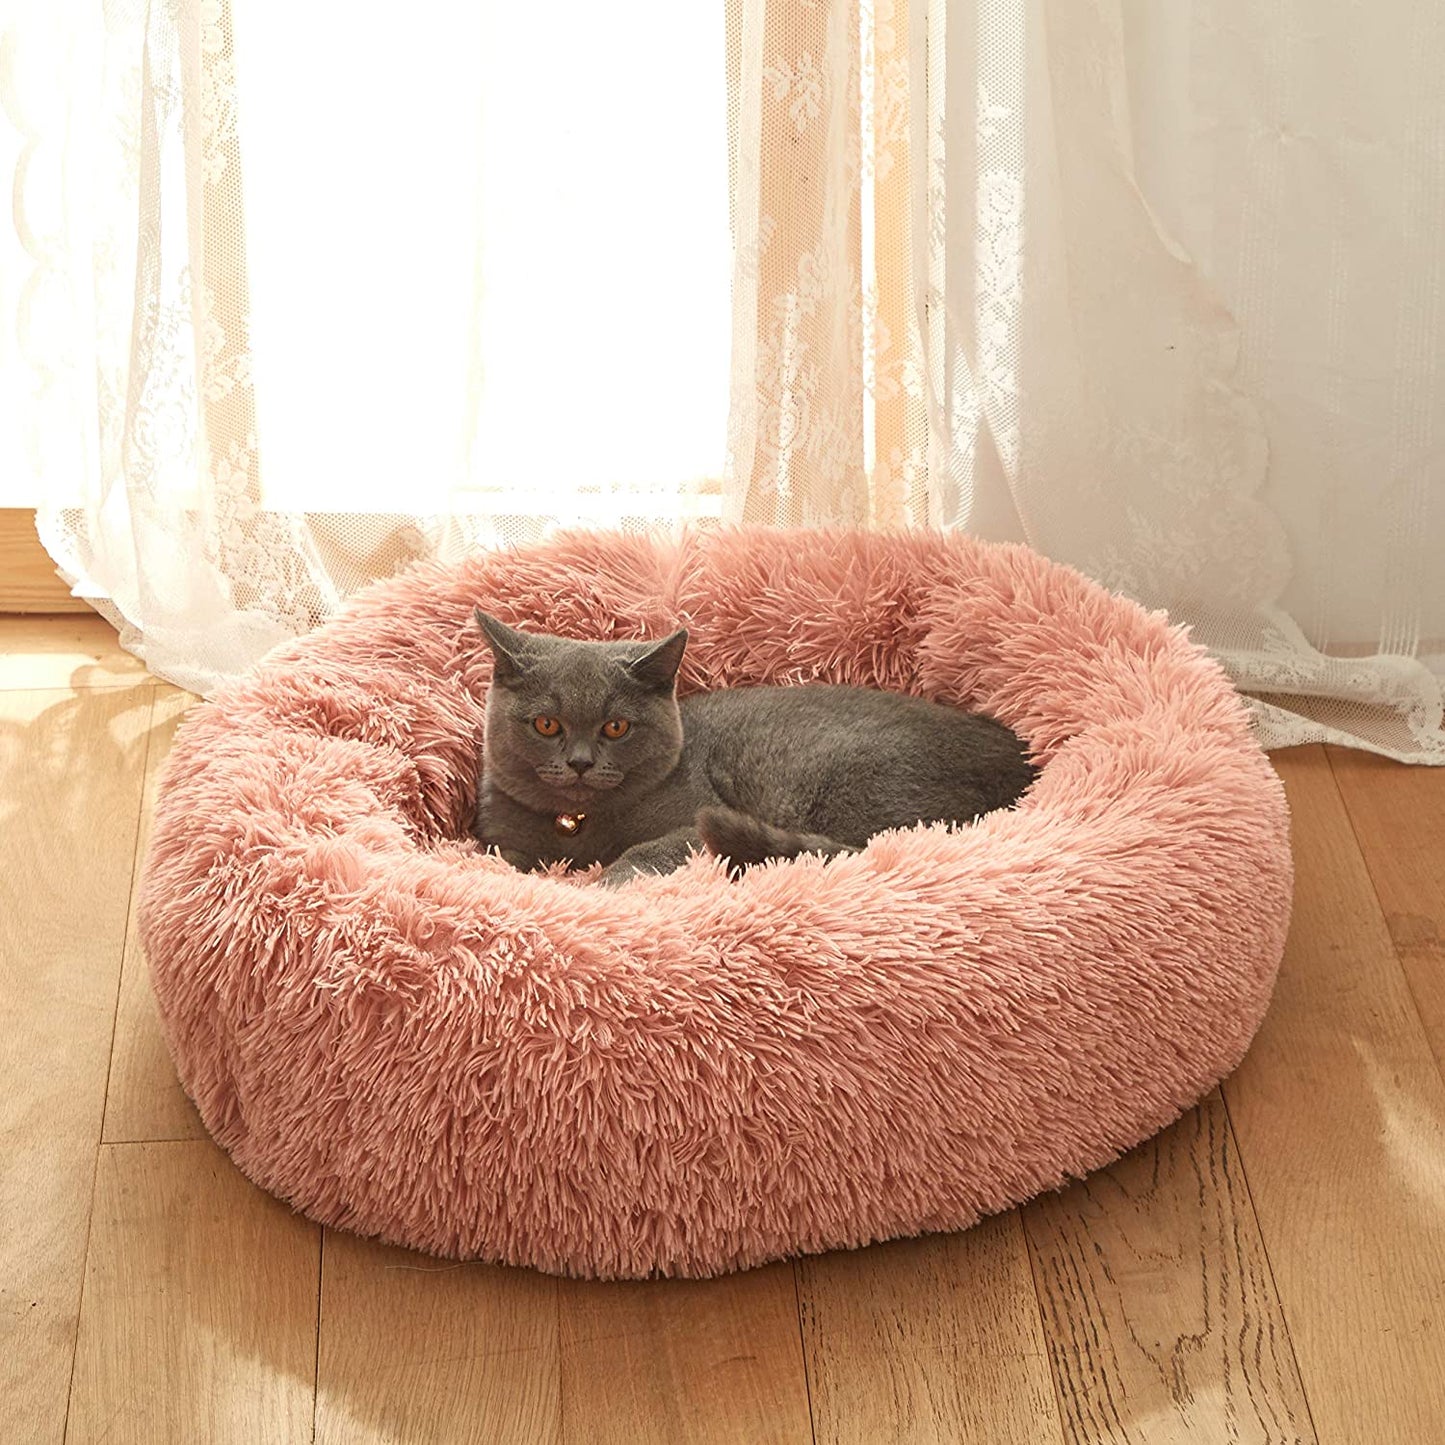 Cozy Pink Fuzzy Donut Bed for Dogs & Cats - Snuggly Winter Cushion for a Perfect Nap